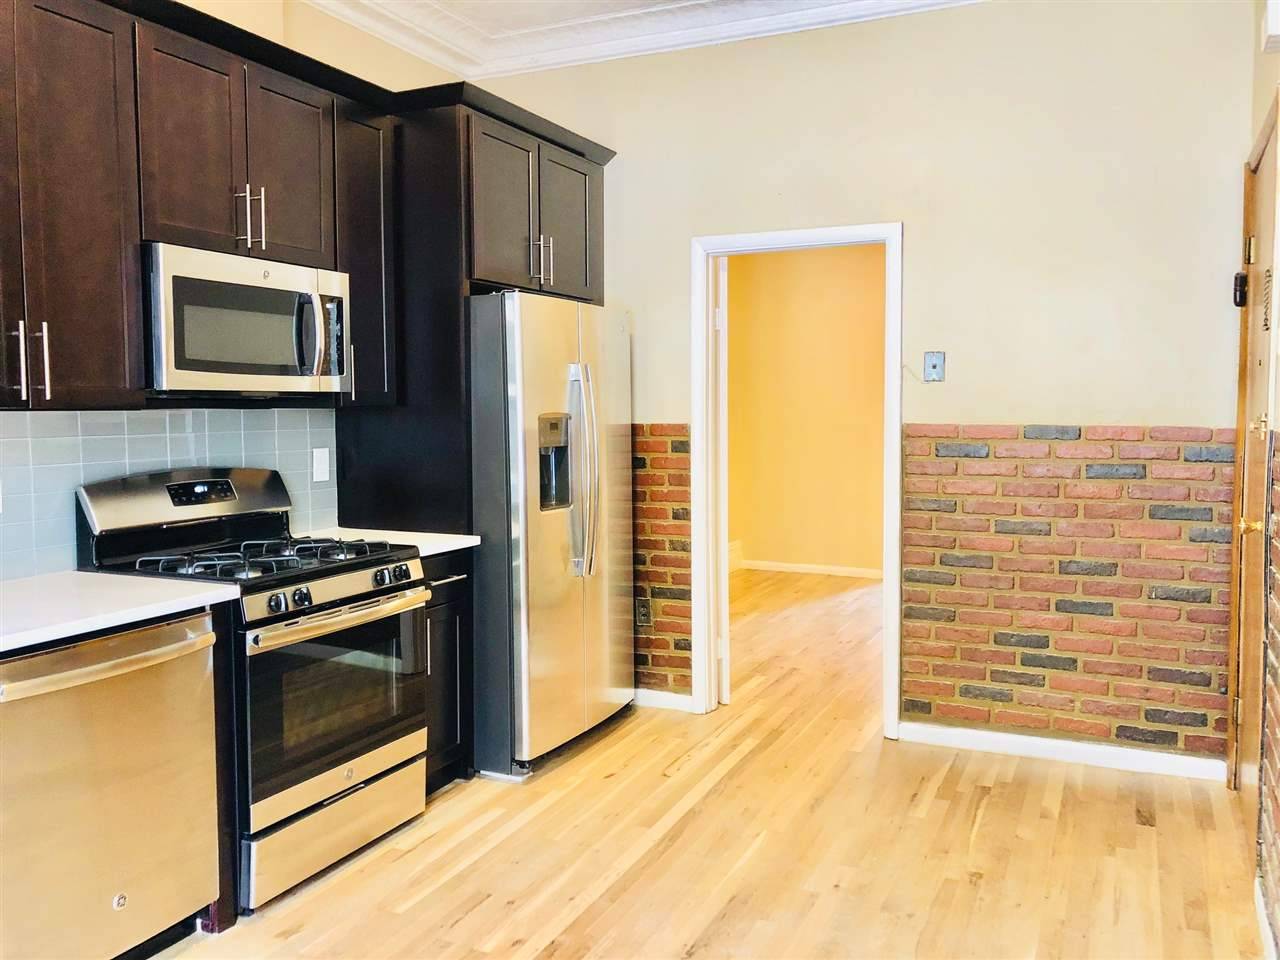 Be the first live in this newly renovated 1 bed + den apartment